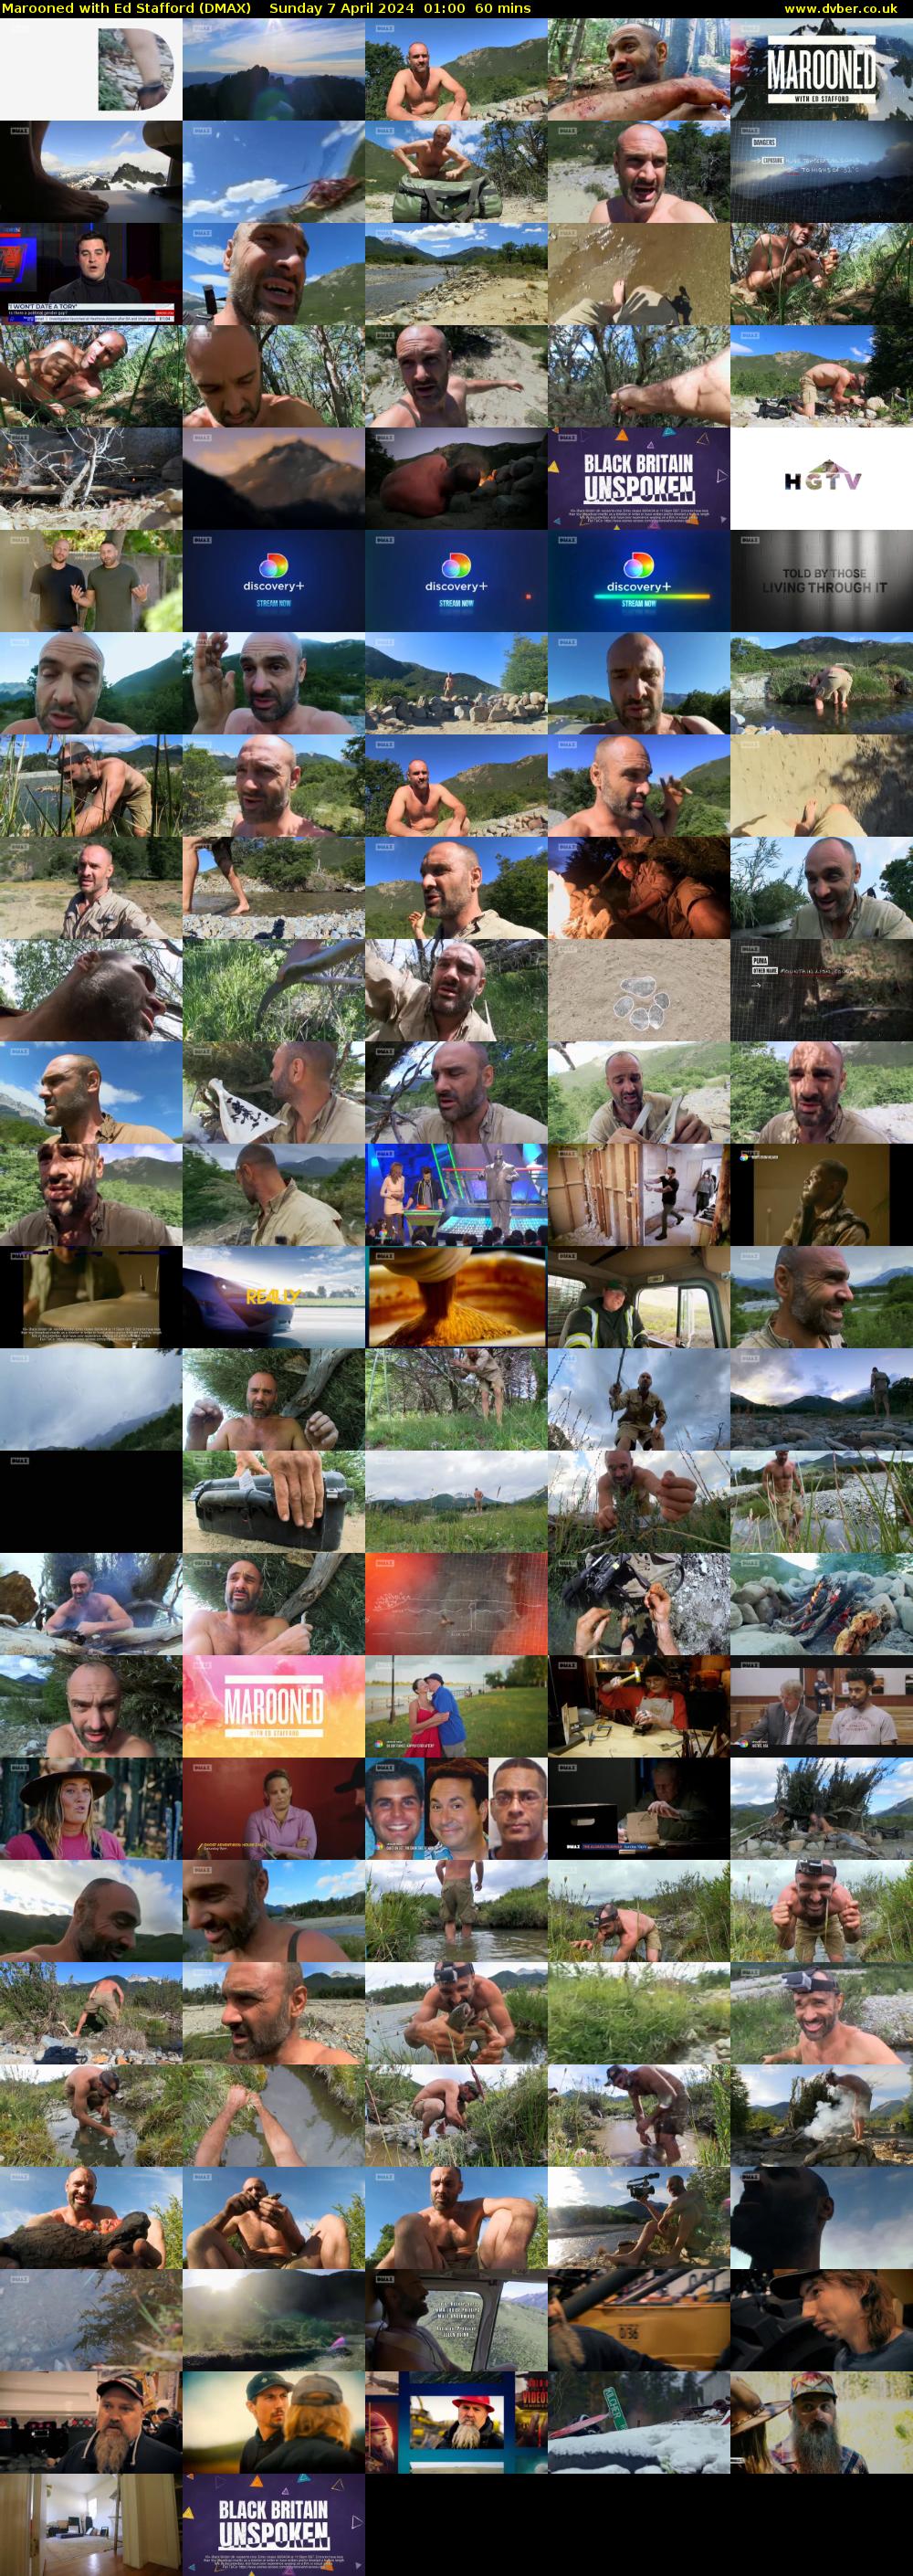 Marooned with Ed Stafford (DMAX) Sunday 7 April 2024 01:00 - 02:00